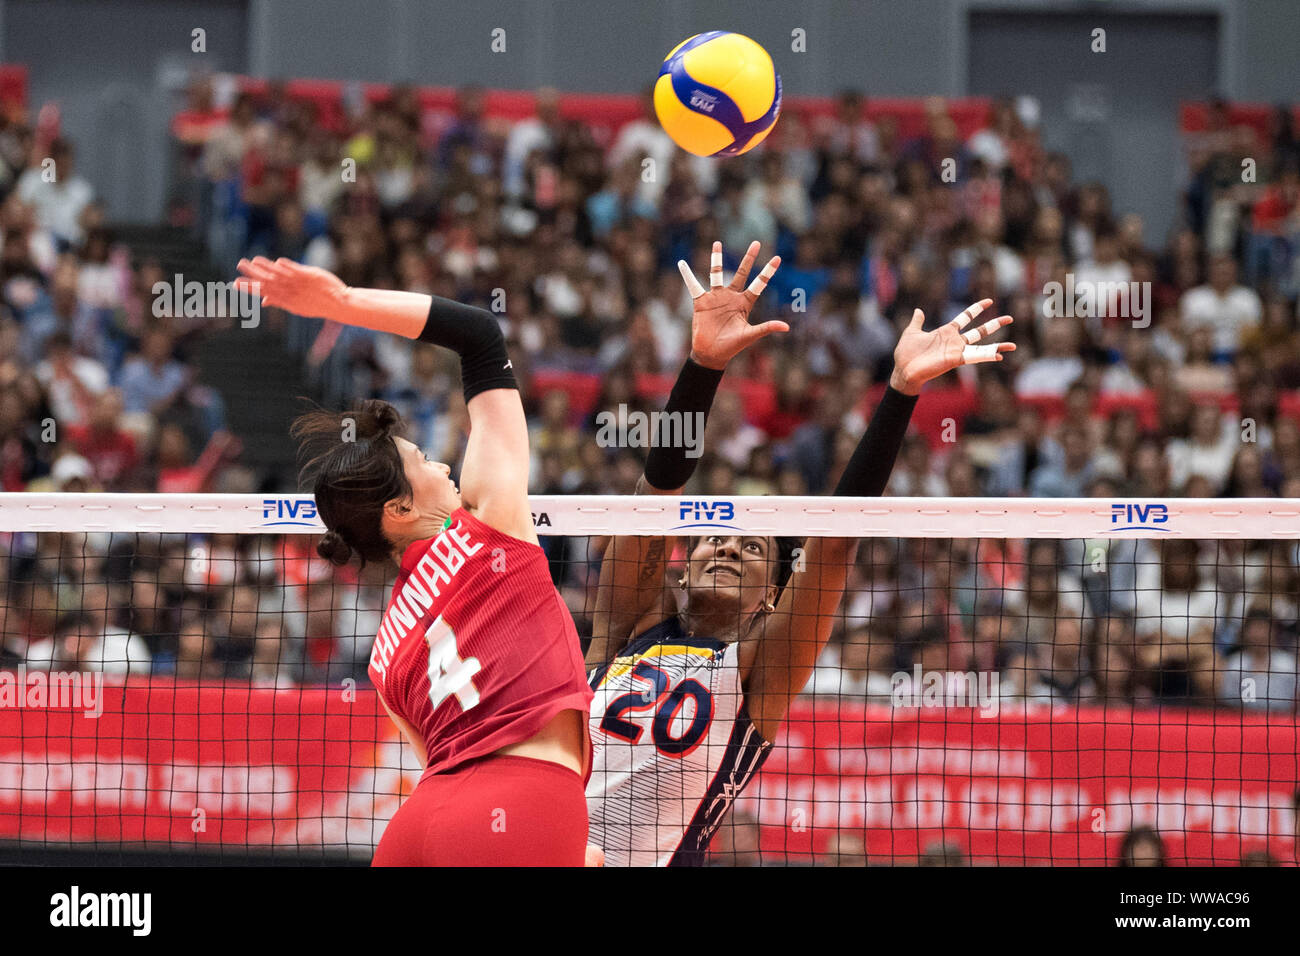 Yokohama, Japan. 14th Sep, 2019. Risa Shinnabe (L) of Japan spikes the ball during the Round Robin match between the Dominican Republic and Japan at the 2019 FIVB Women's World Cup in Yokohama, Japan, Sept. 14, 2019. Credit: Zhu Wei/Xinhua/Alamy Live News Stock Photo